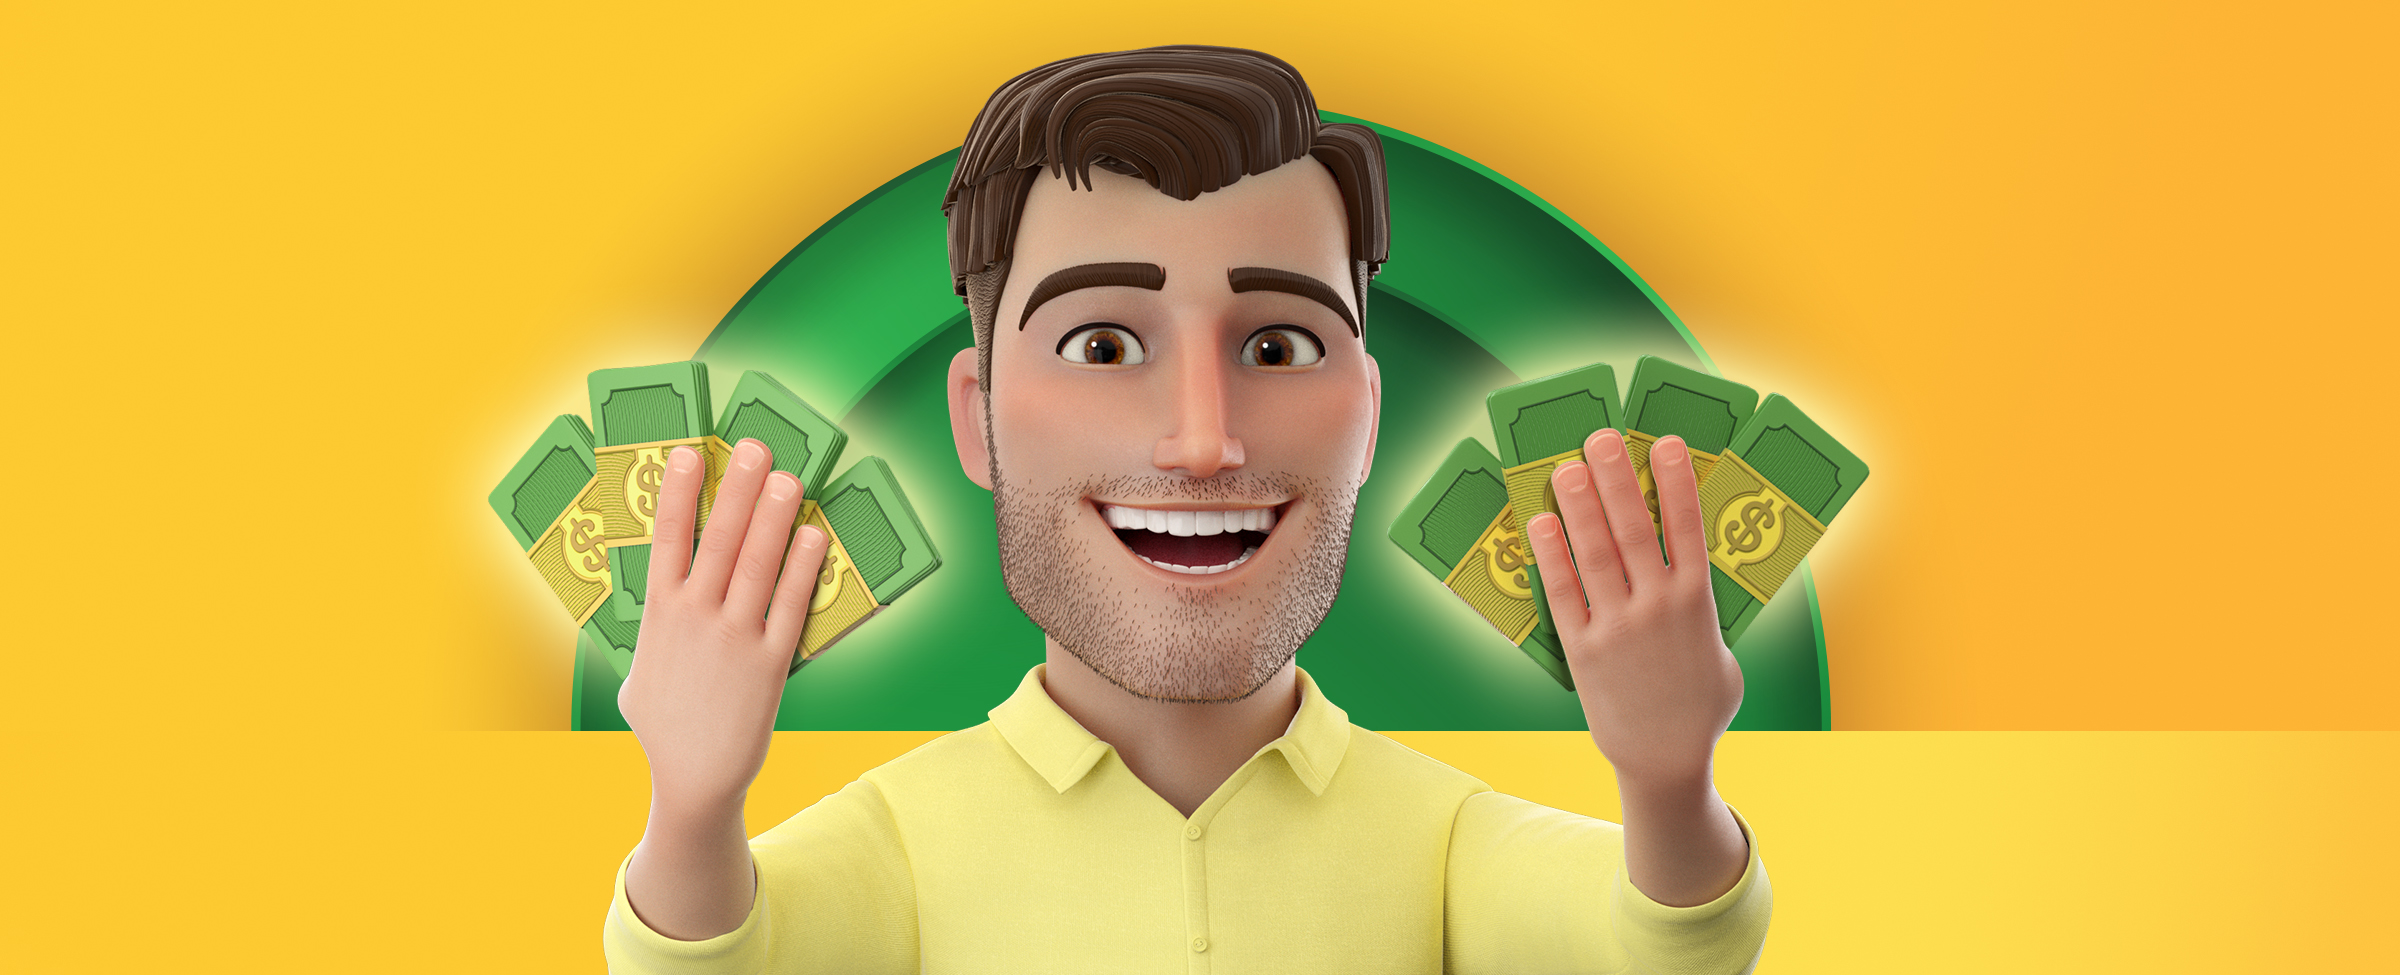 The Joe Fortune character holding two wads of fanned out notes of money in each hand on a vibrant yellow background.